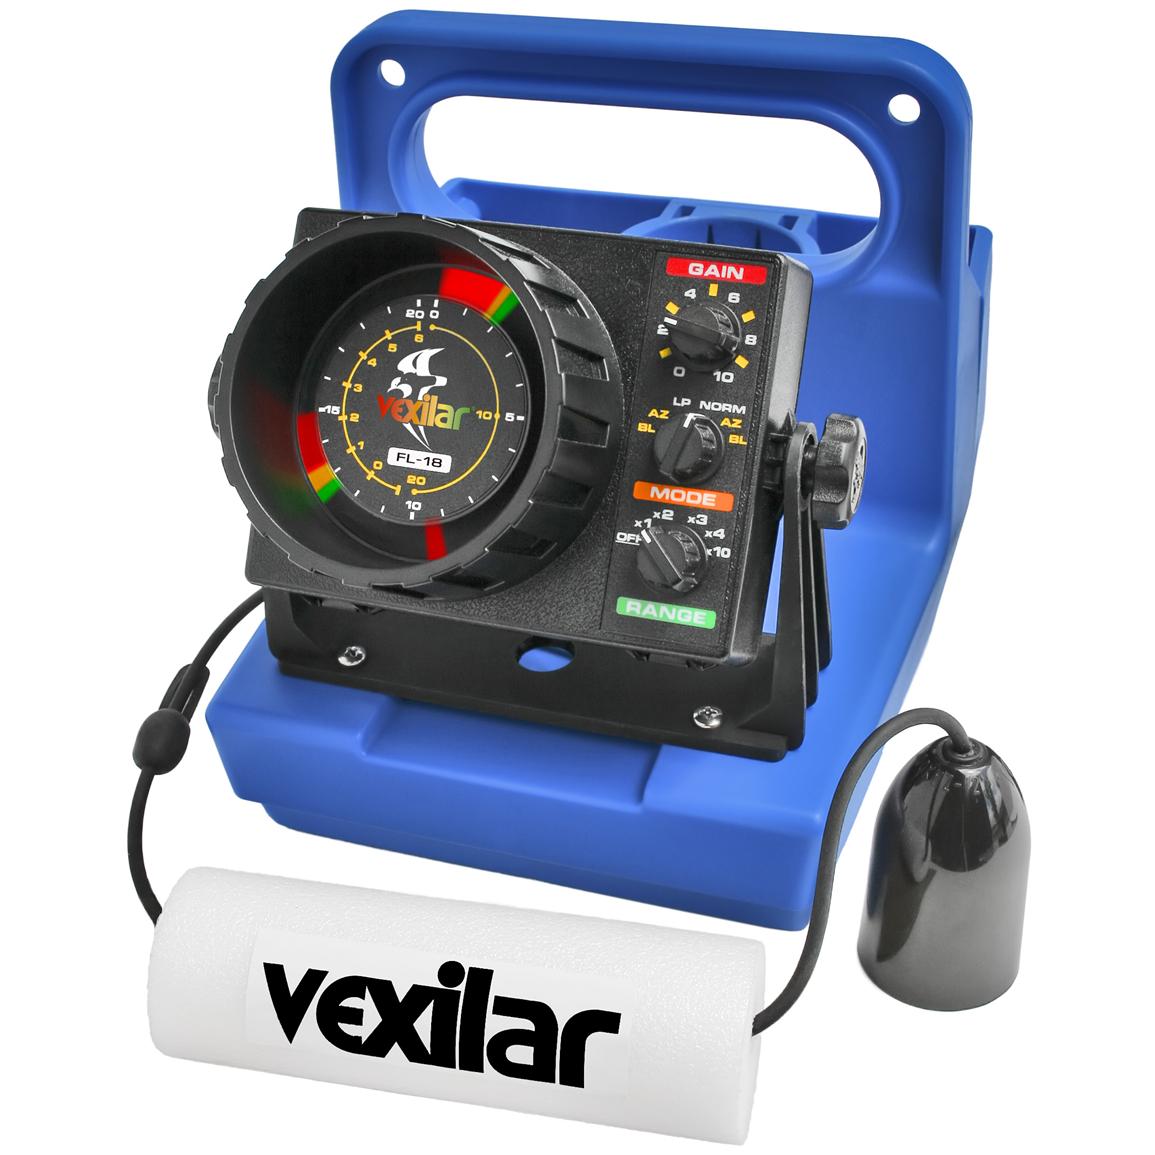 The FL-18® Genz Pack with 12° Ice - Ducer from Vexilar®